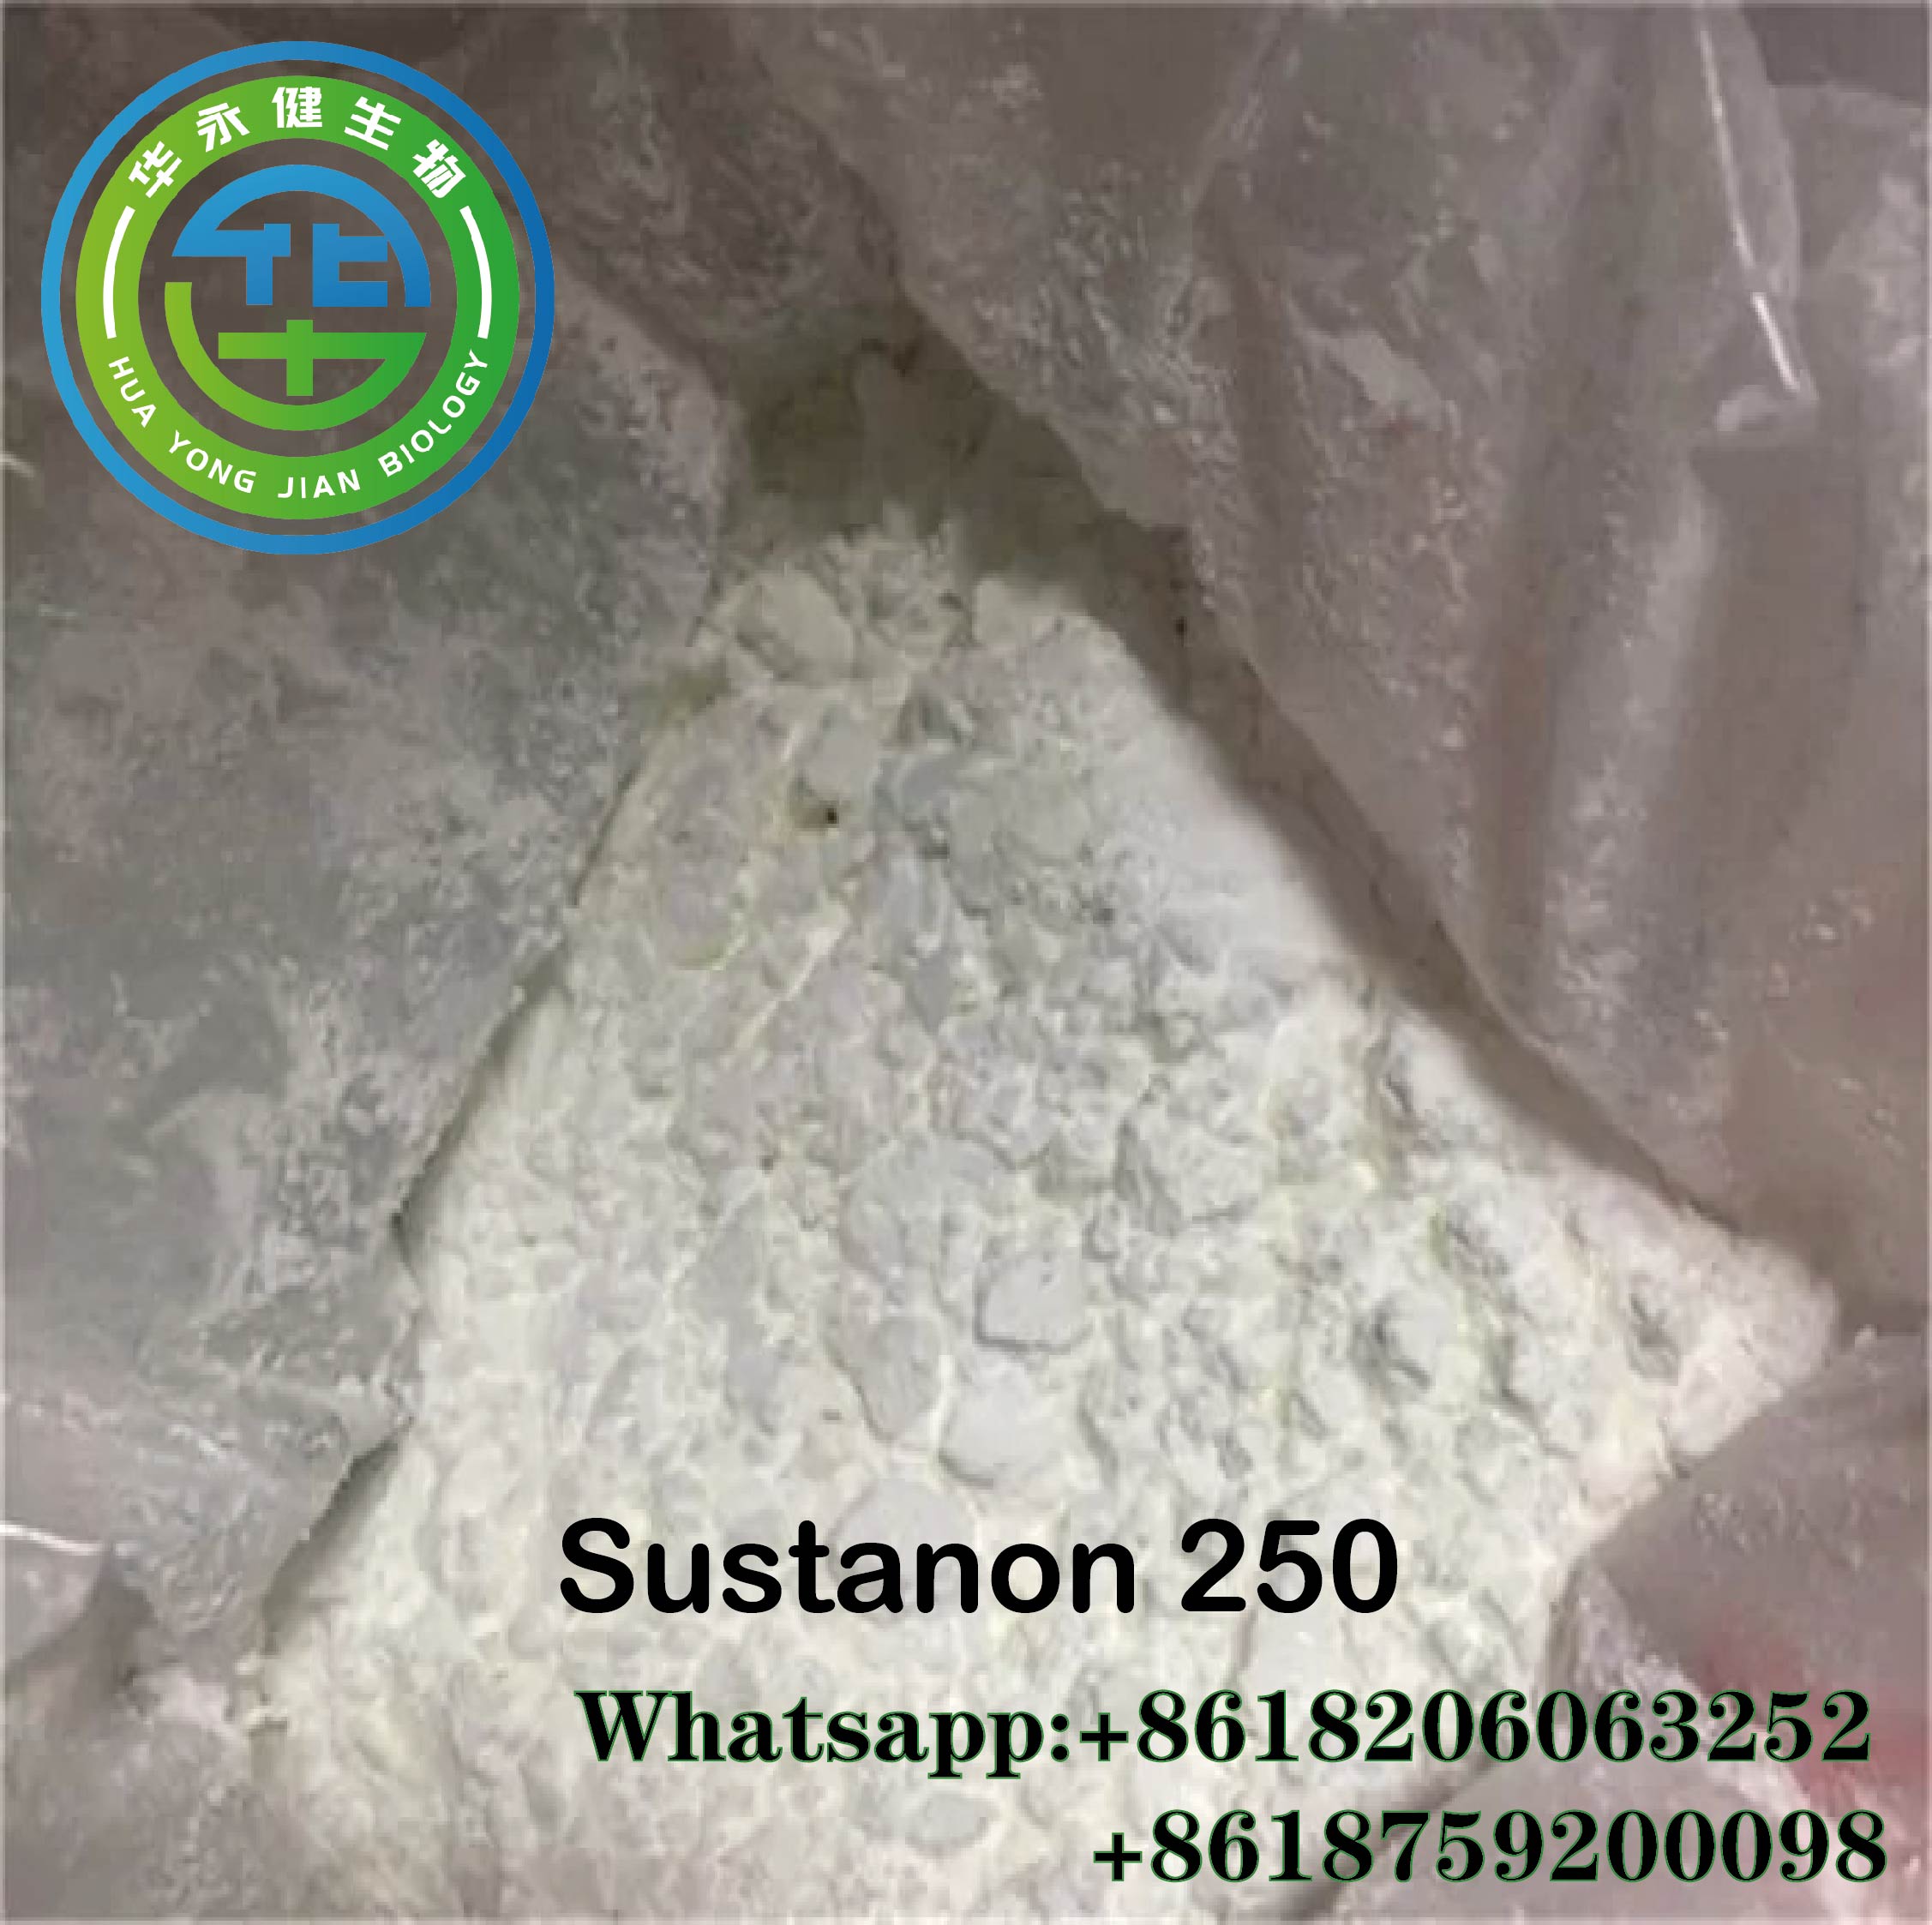 Testosterone Sustanon China Factory Top Quality Steroids Supply S250 Powder with Safe and Fast Domestic Shipping to Us Canada